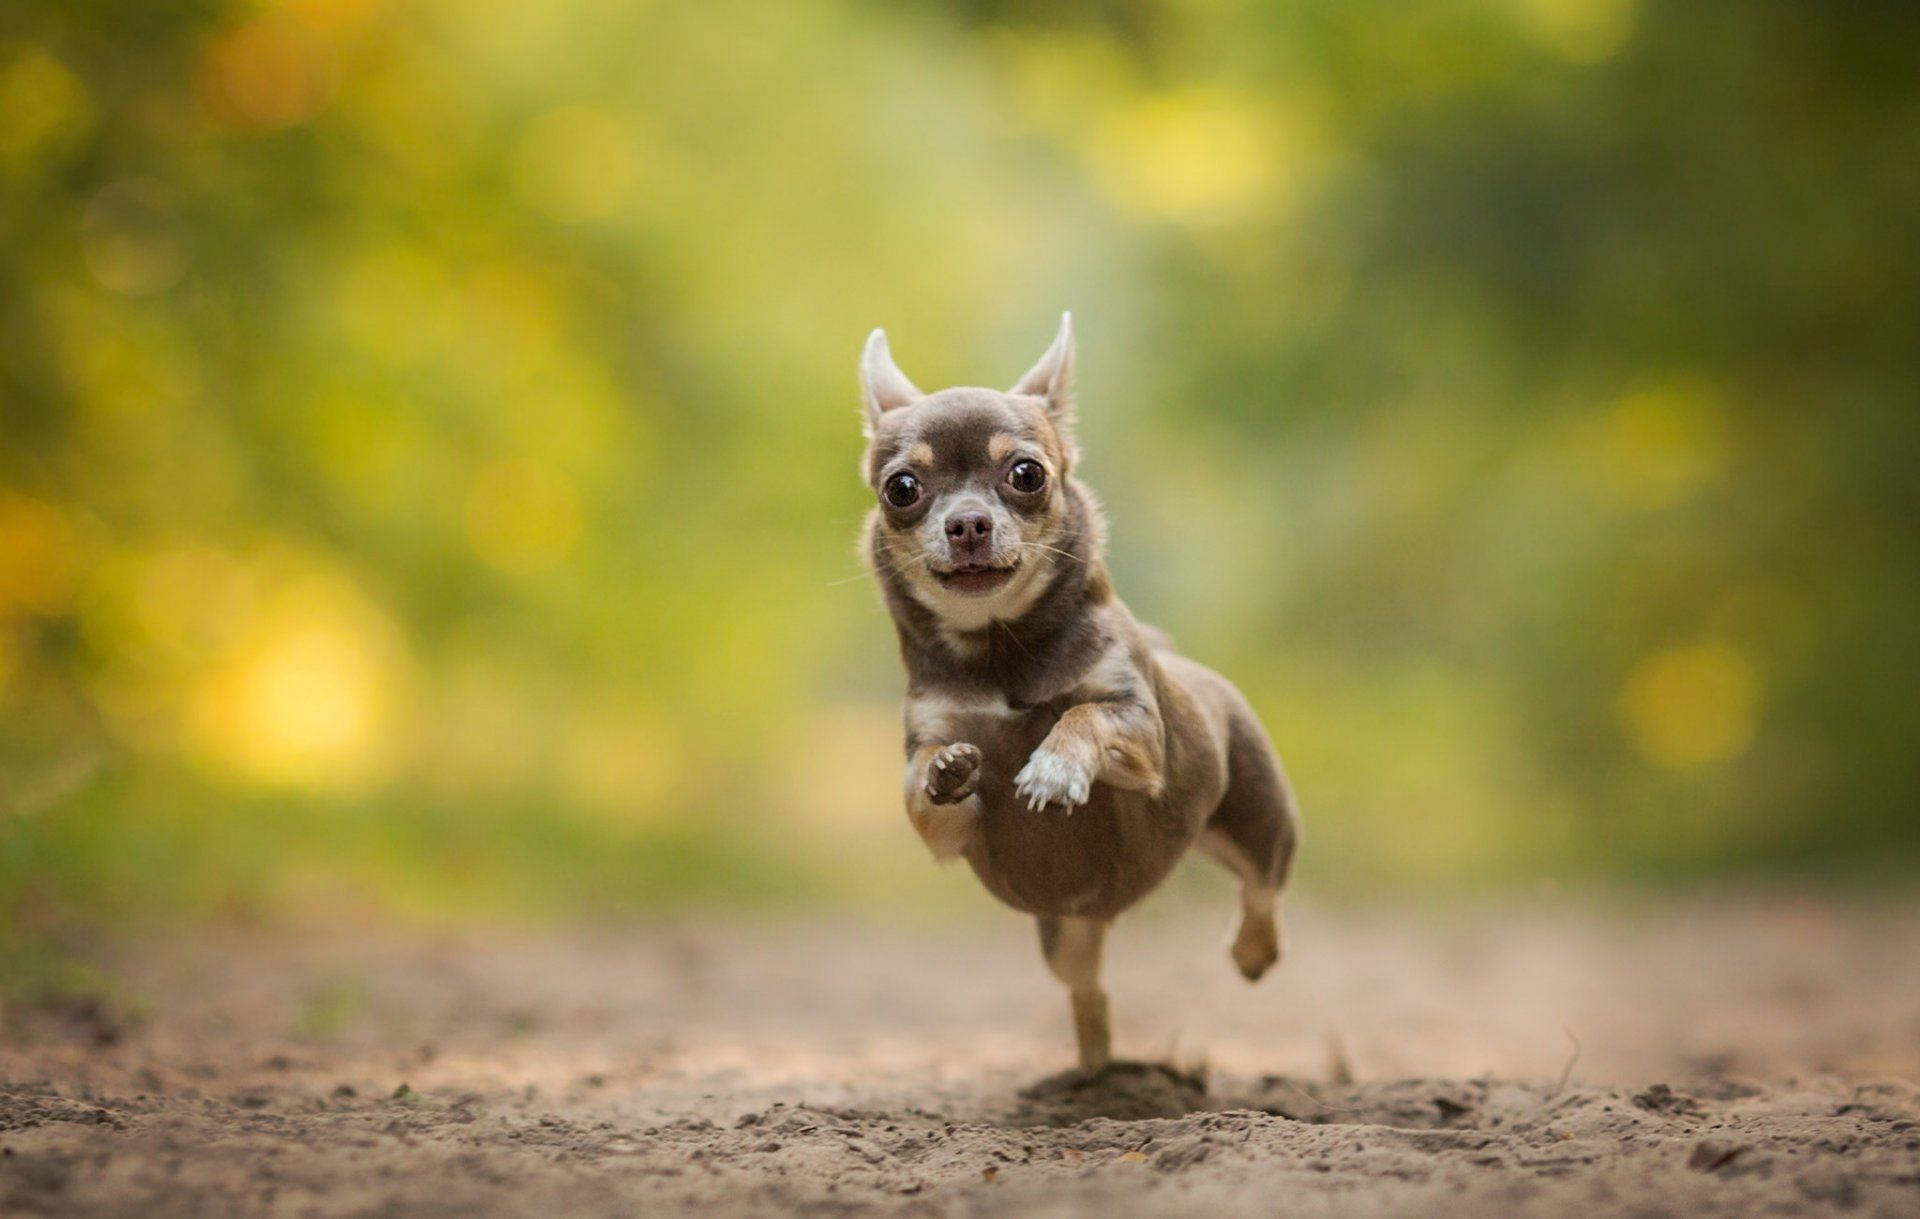 Chihuahua Puppy Running Photography